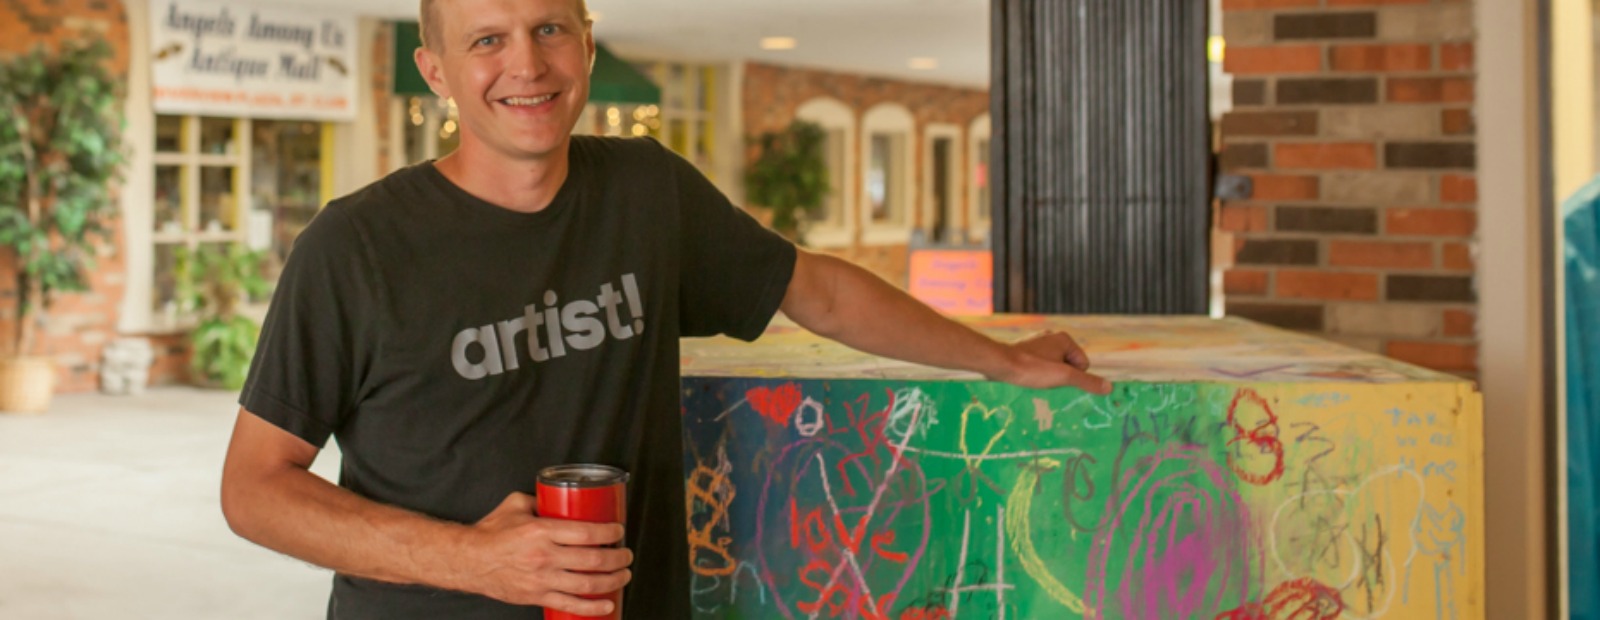 Jason Stier is heading a community art project in St. Clair to bring residents together